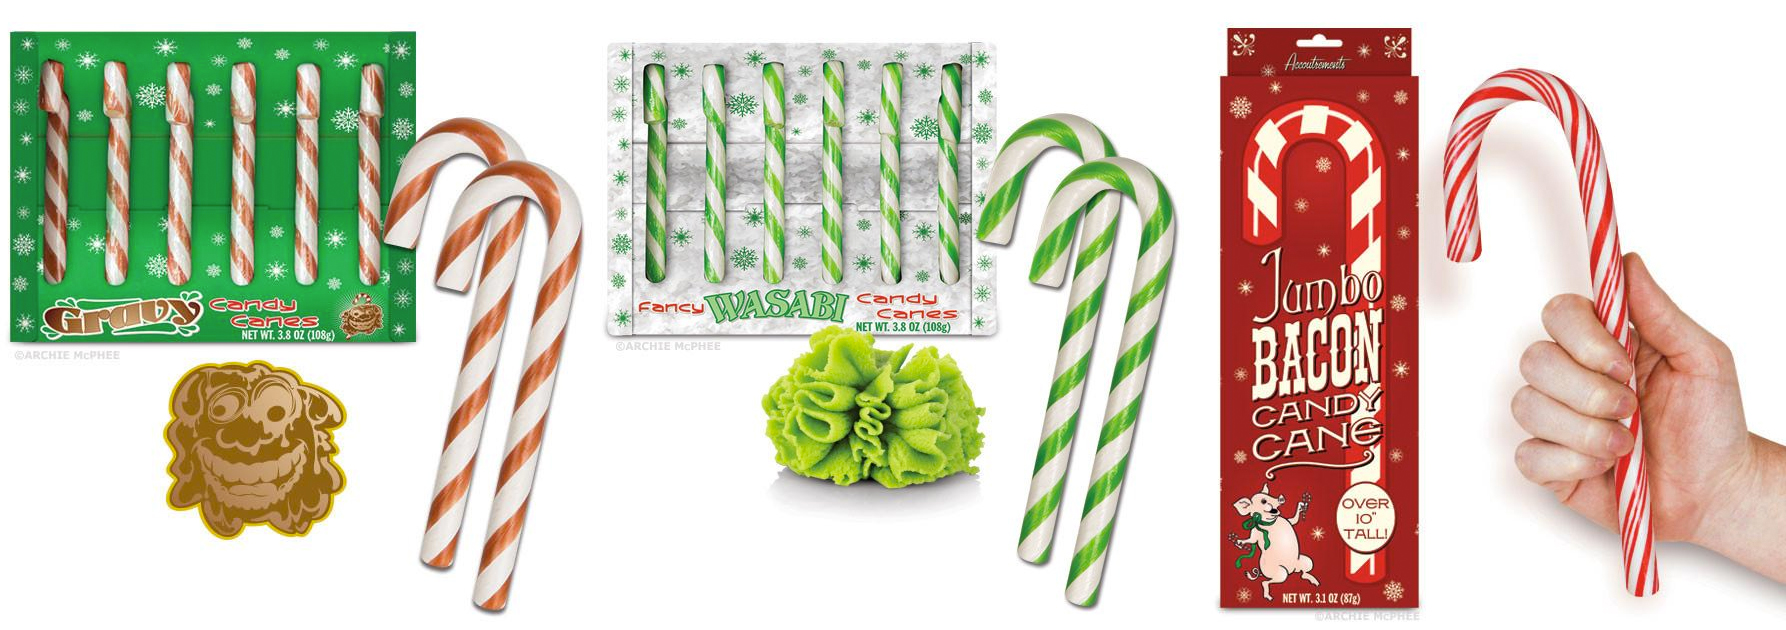 flavored-candy-canes-archie-mcphee